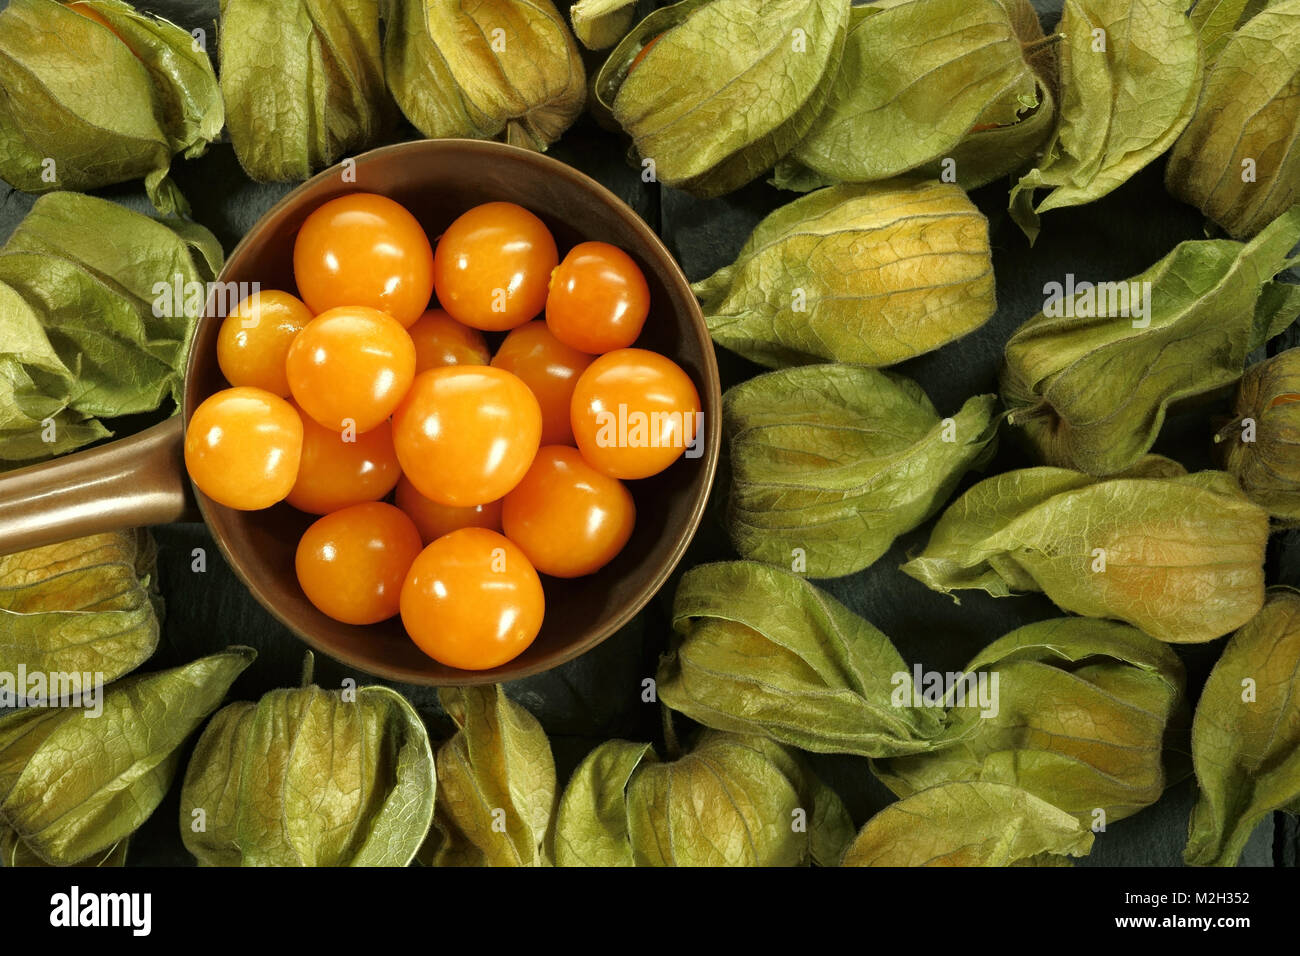 Physalis, exotic fruit, copper saucepan with yellow-orange fruits in green leaves Stock Photo